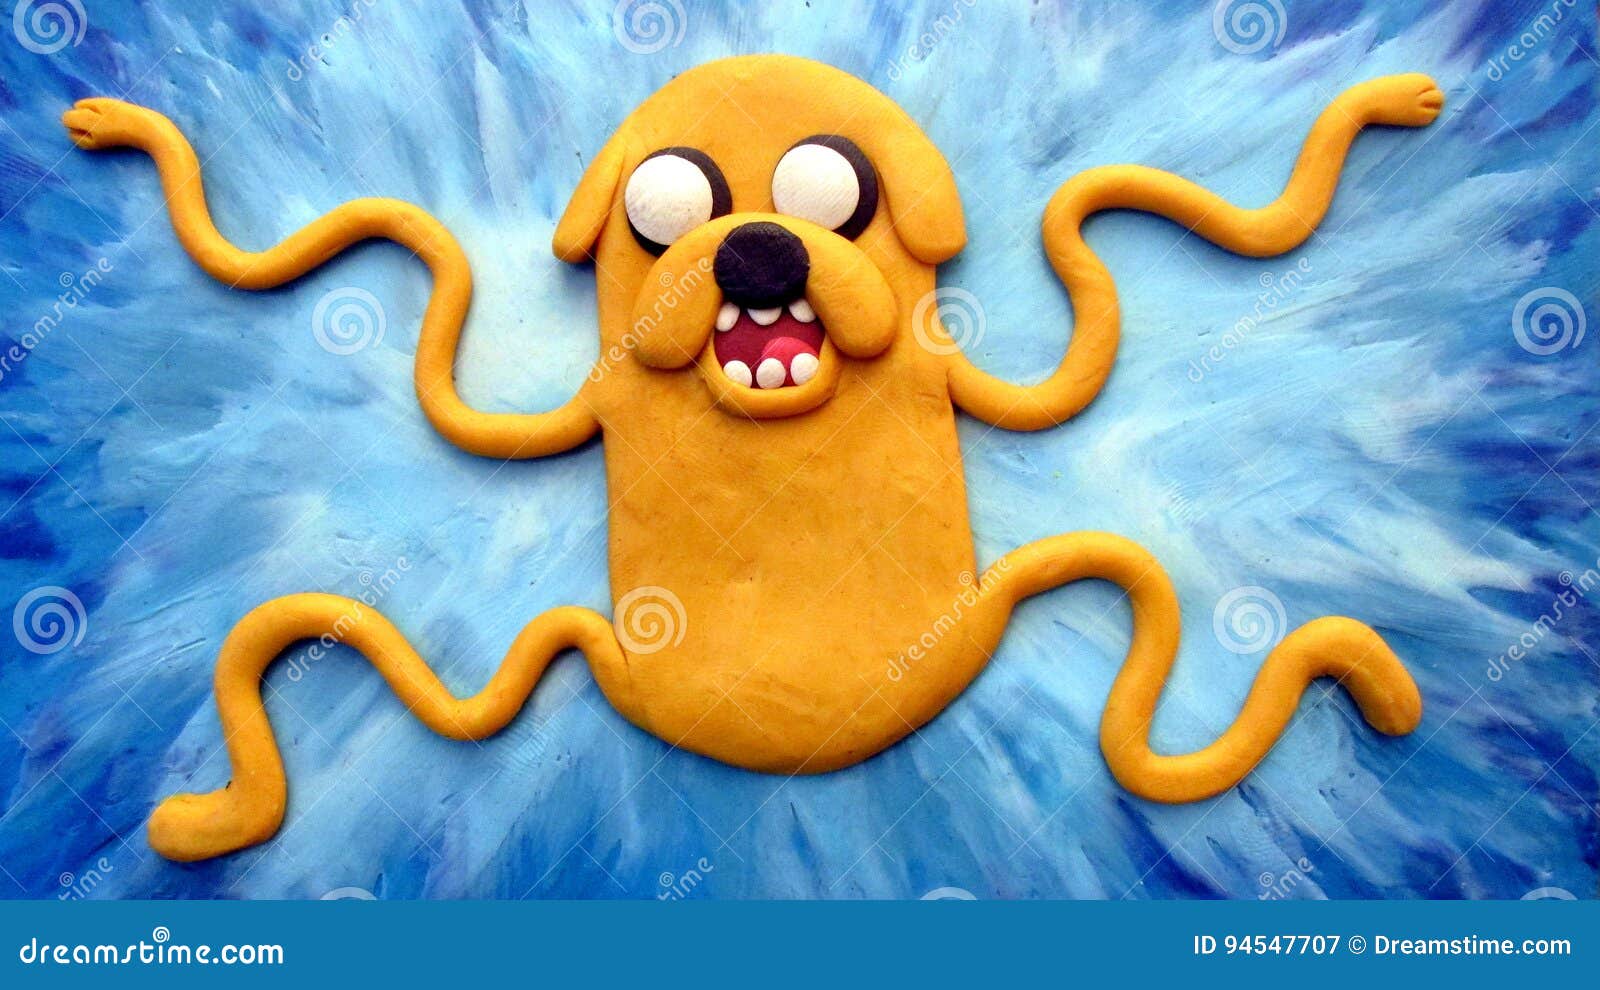 jake the dog clay plasticine animated wallpaper adventure time